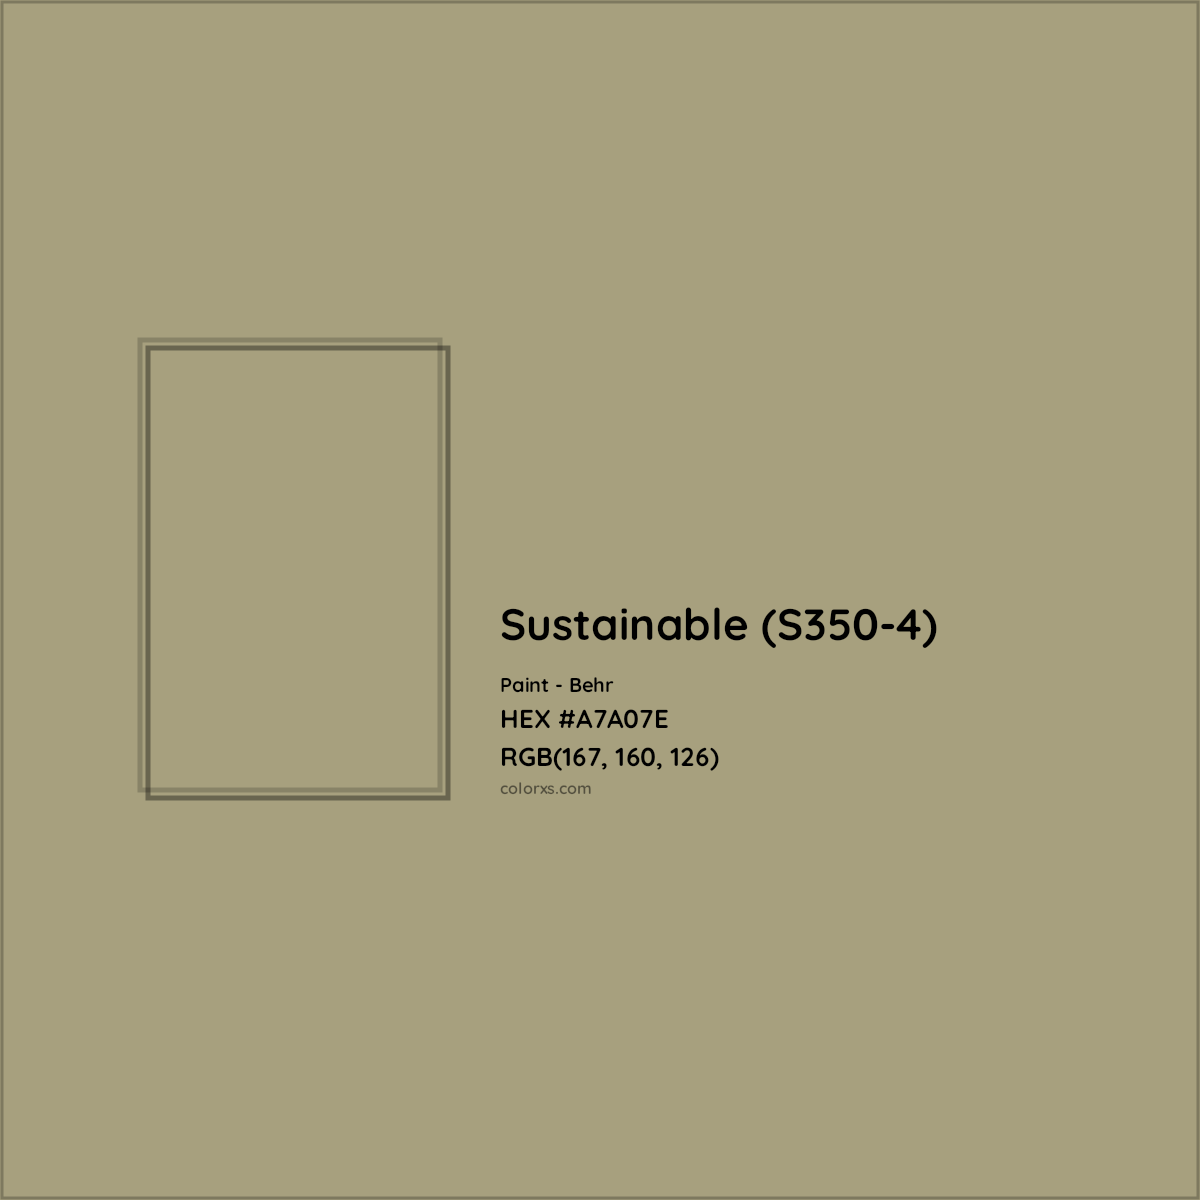 HEX #A7A07E Sustainable (S350-4) Paint Behr - Color Code